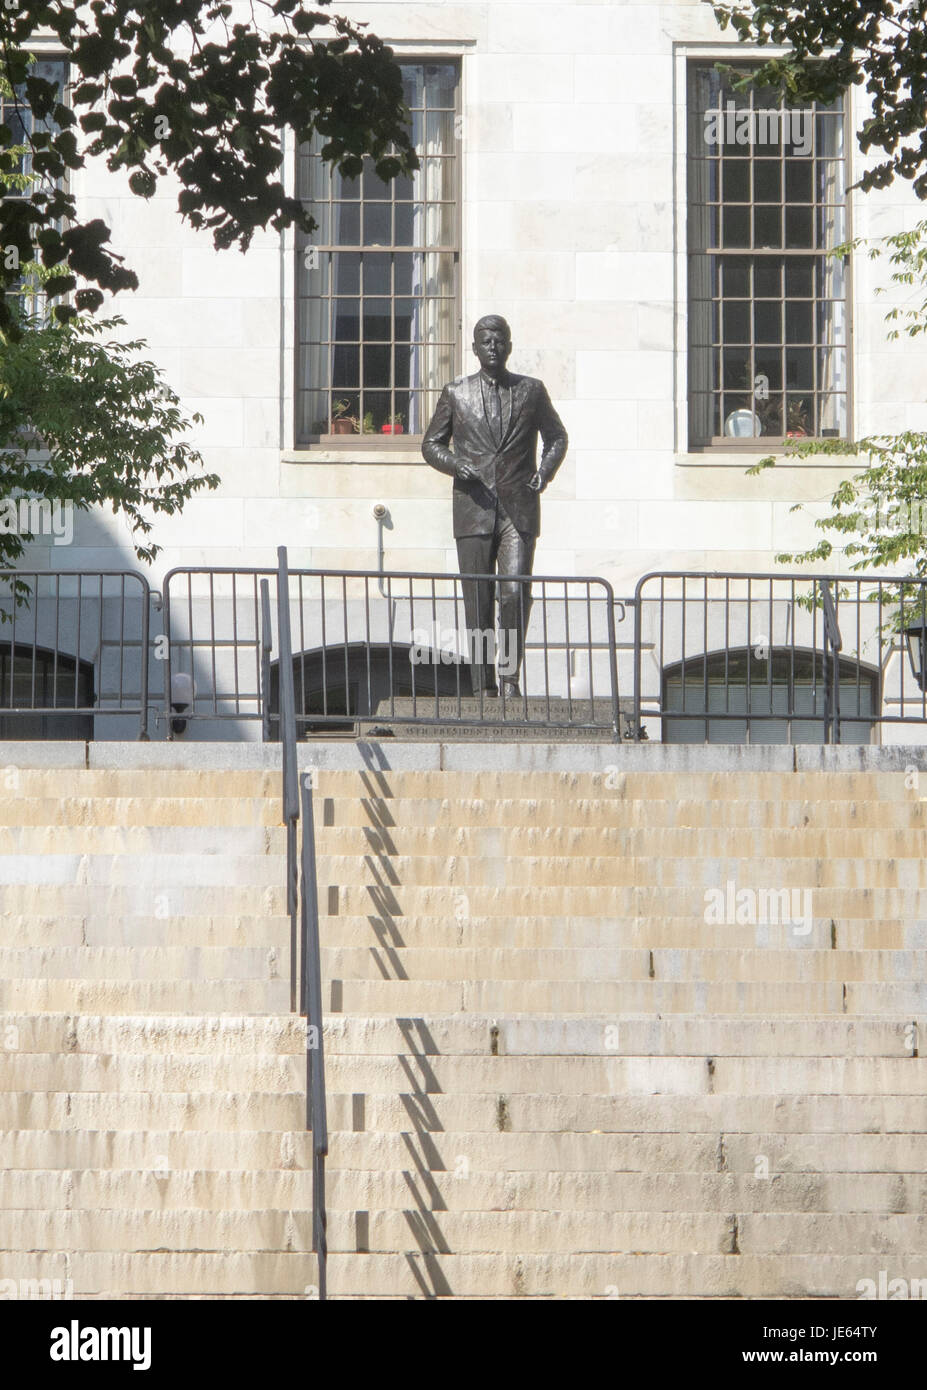 Zoom shot of the John F Kennedy statue in the grounds of the Massachusetts State House on Beacon Street in Boston Stock Photo